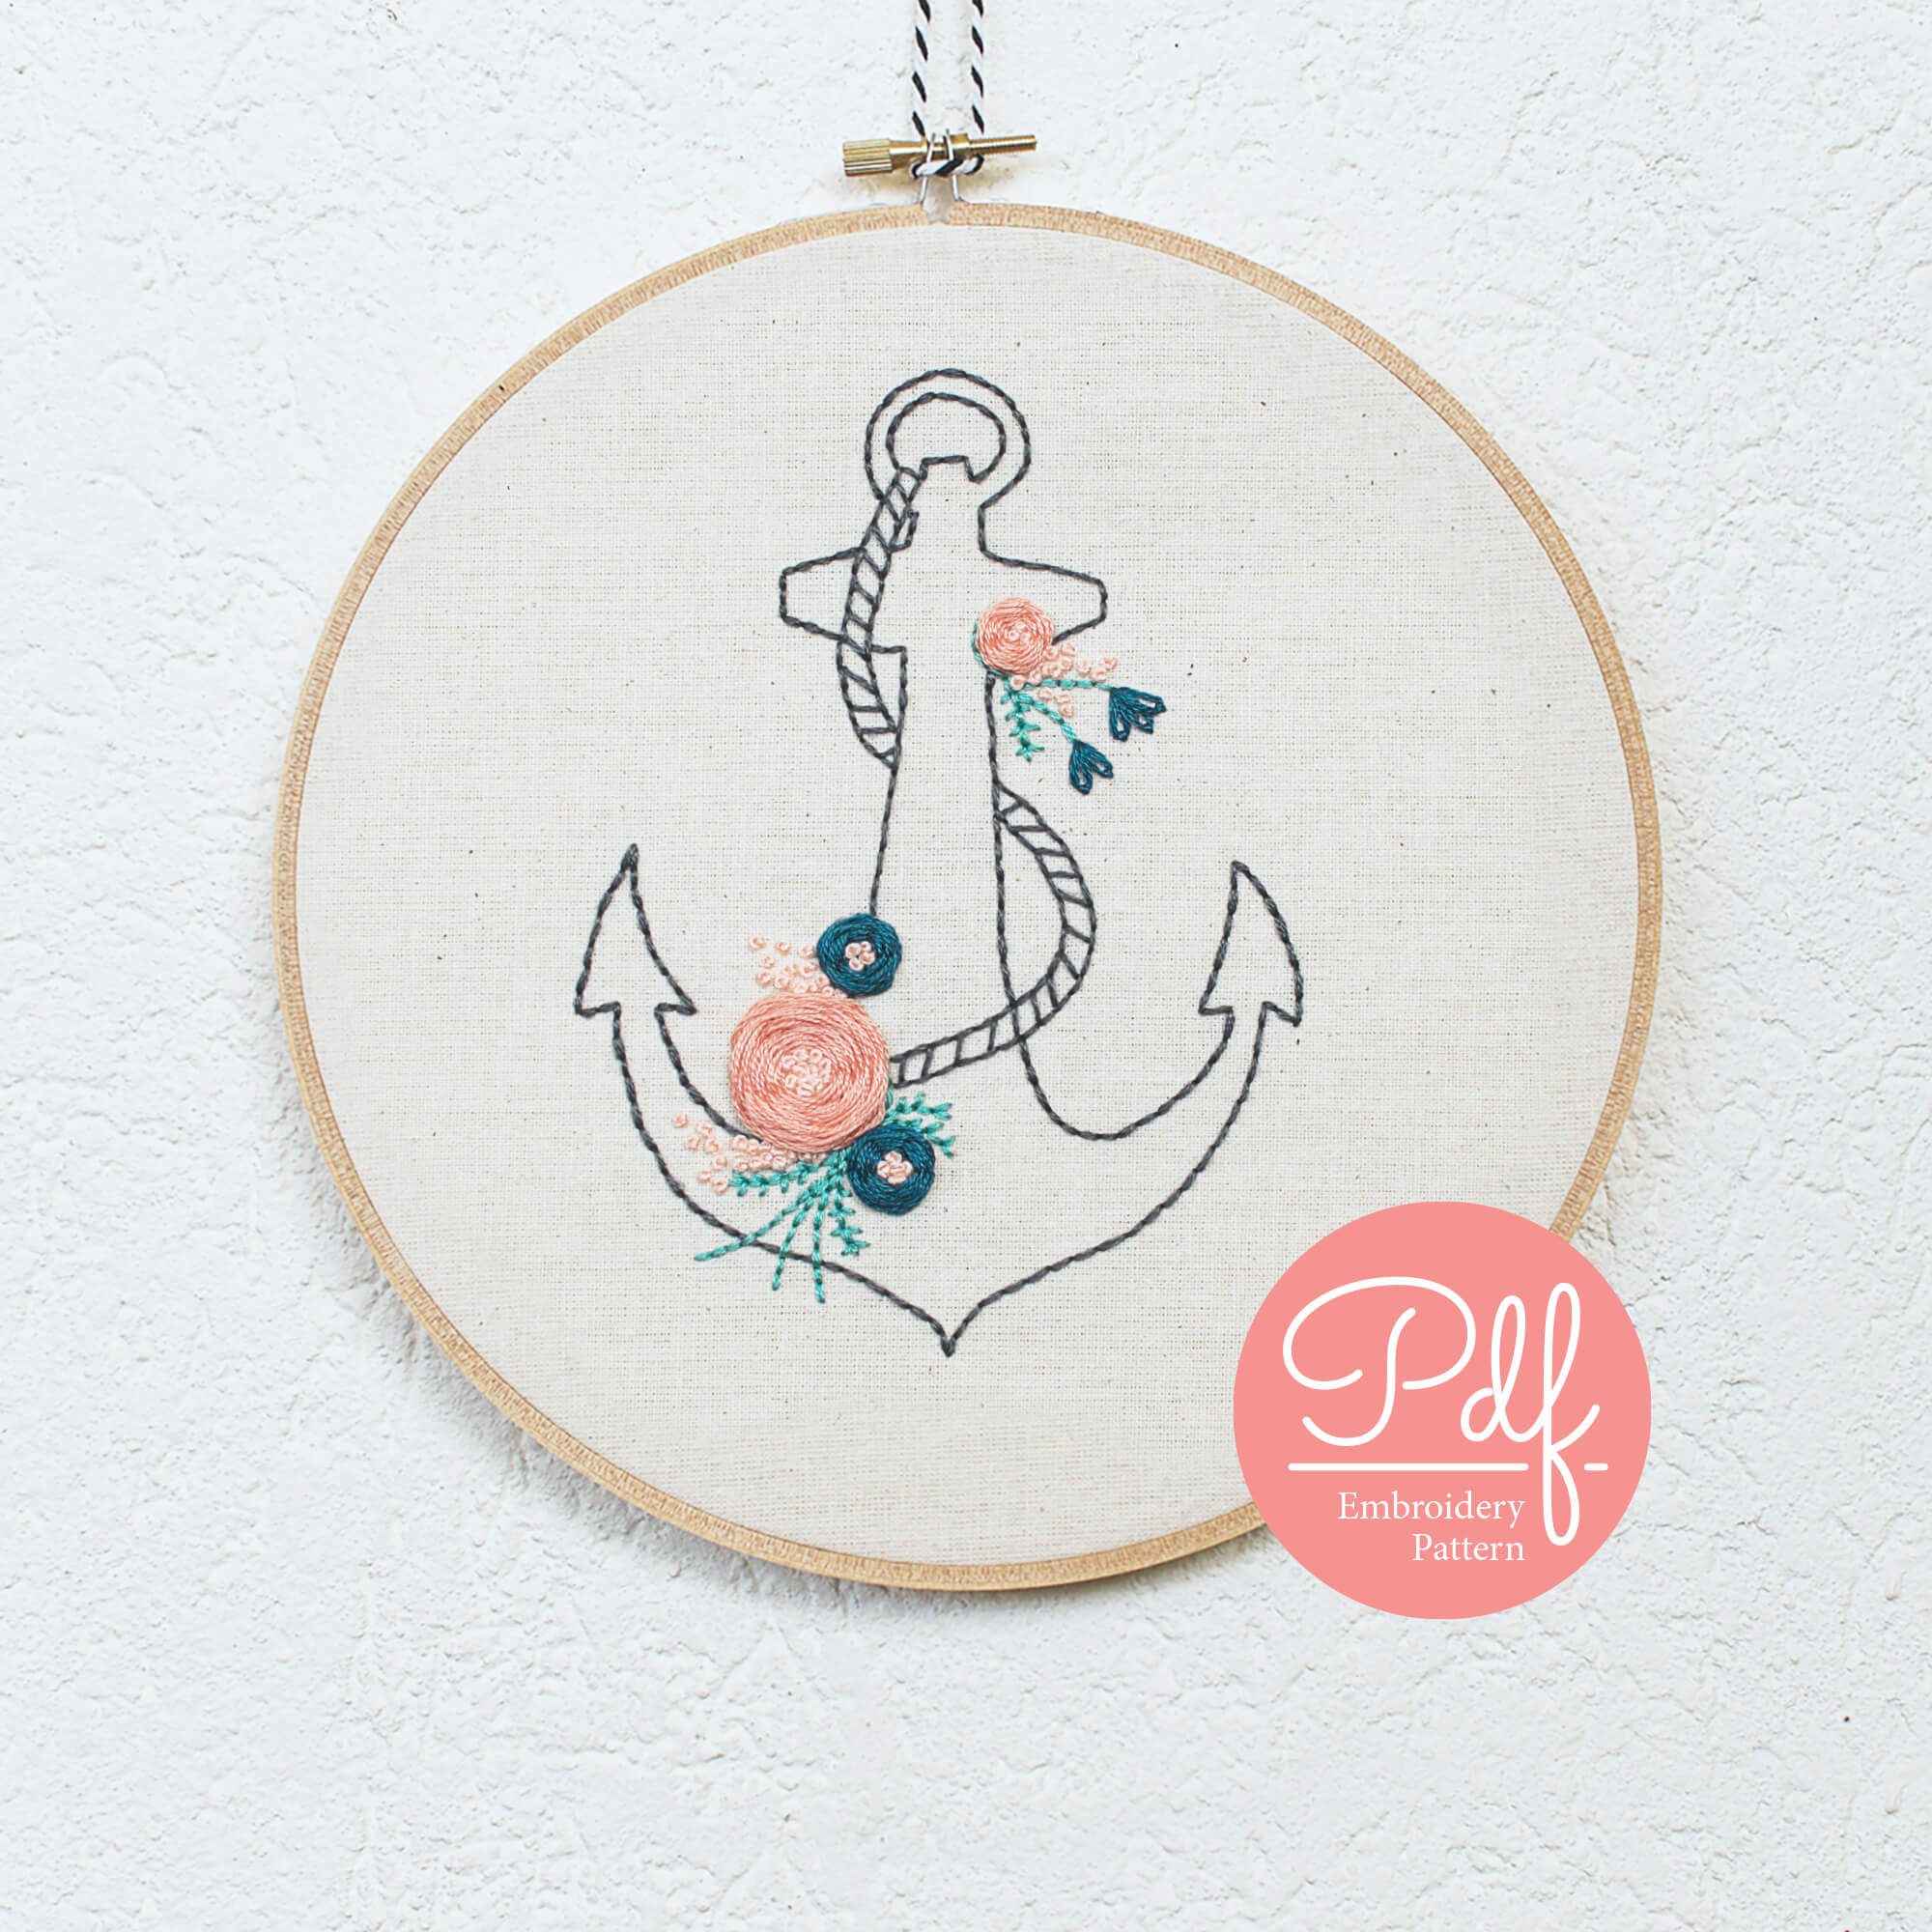 Anchor Threaded Hand Embroidered Soft Beautiful Crafts Cross Stitch  Embroidery Y